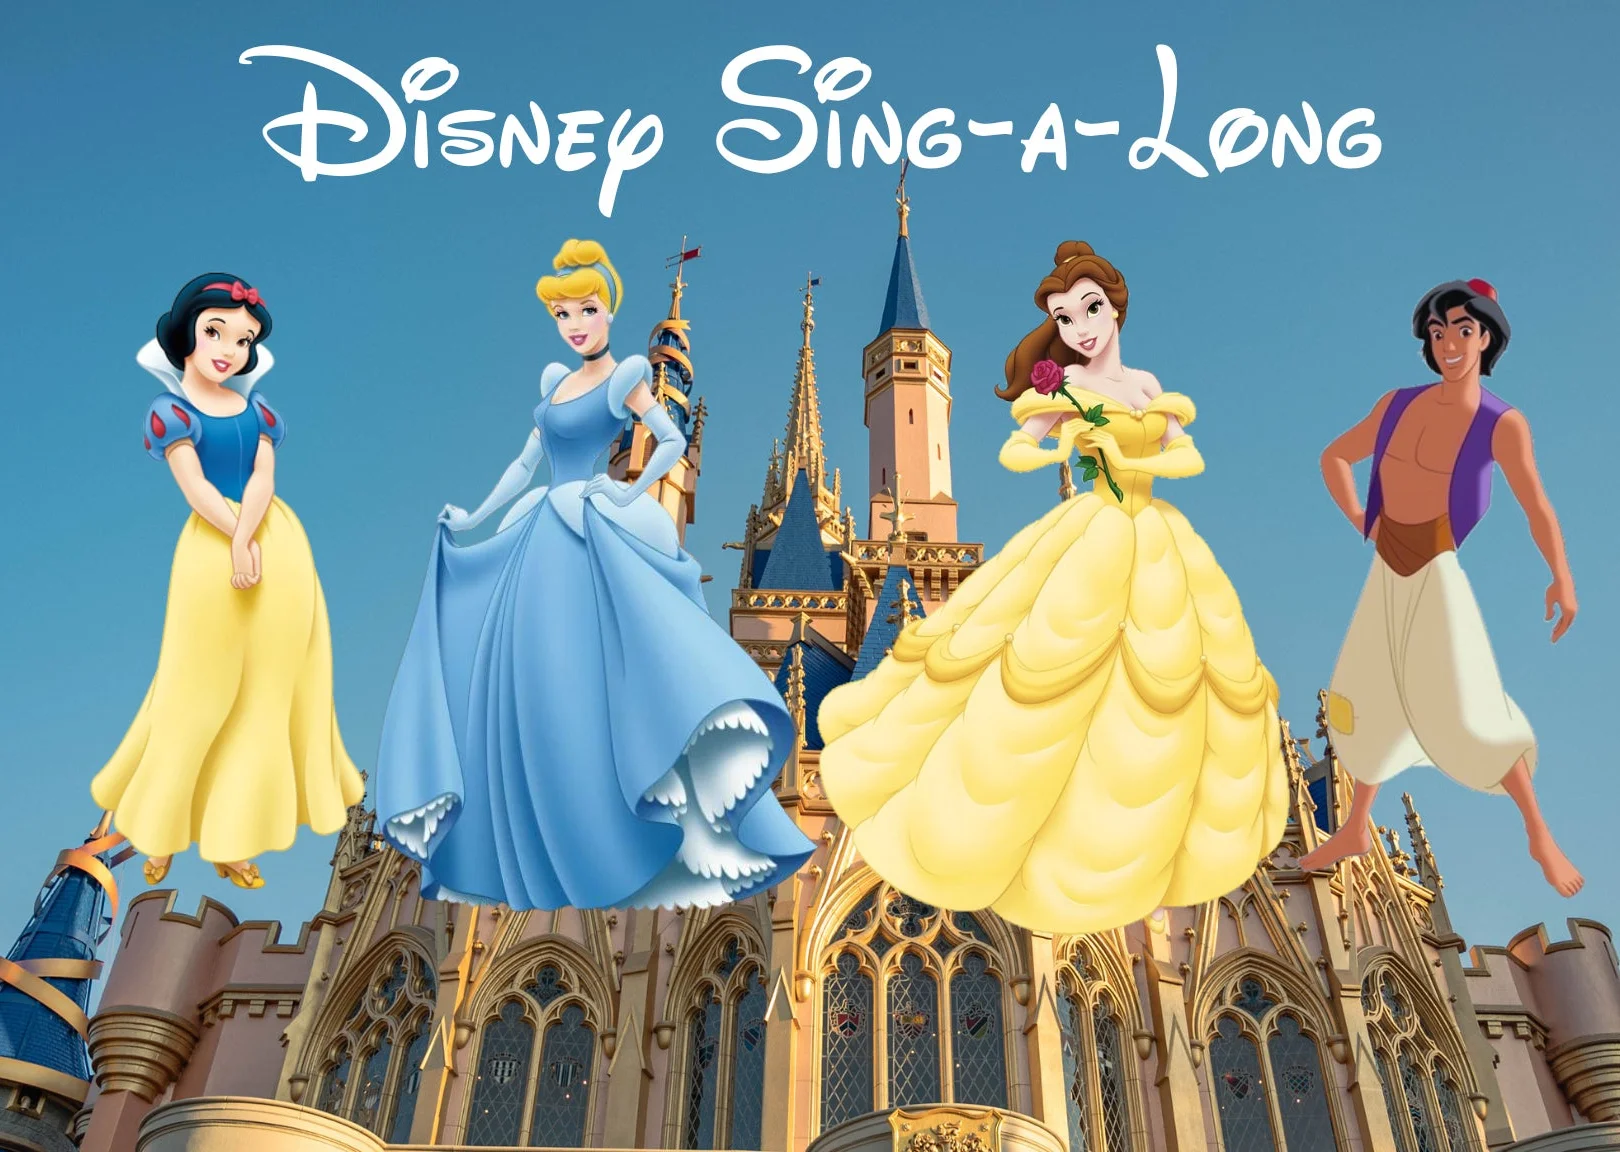 Disney Sing-a-Long Family Event